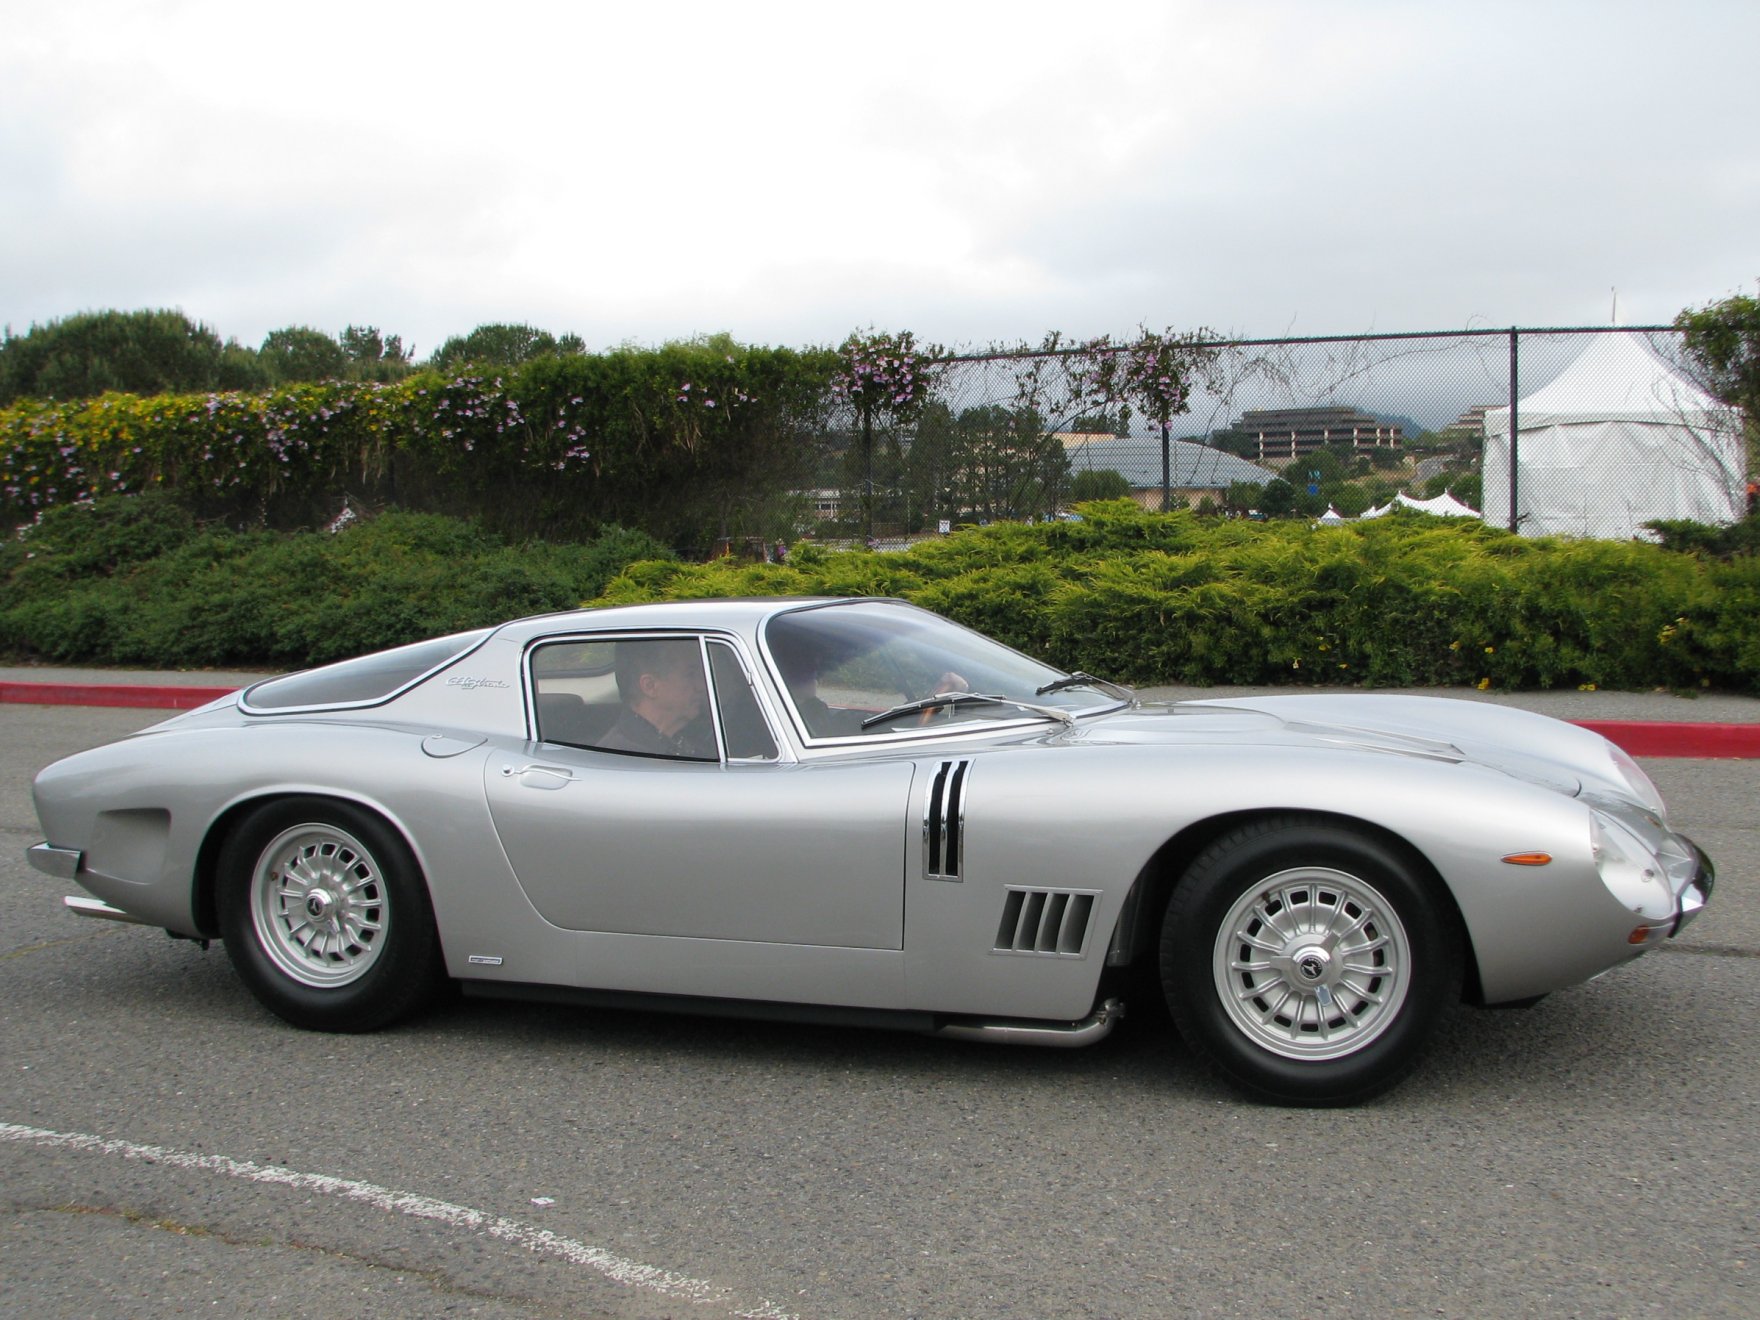 Editorial: Checking Out the Pro-offered Treasures - Bizzarrini GT 5300